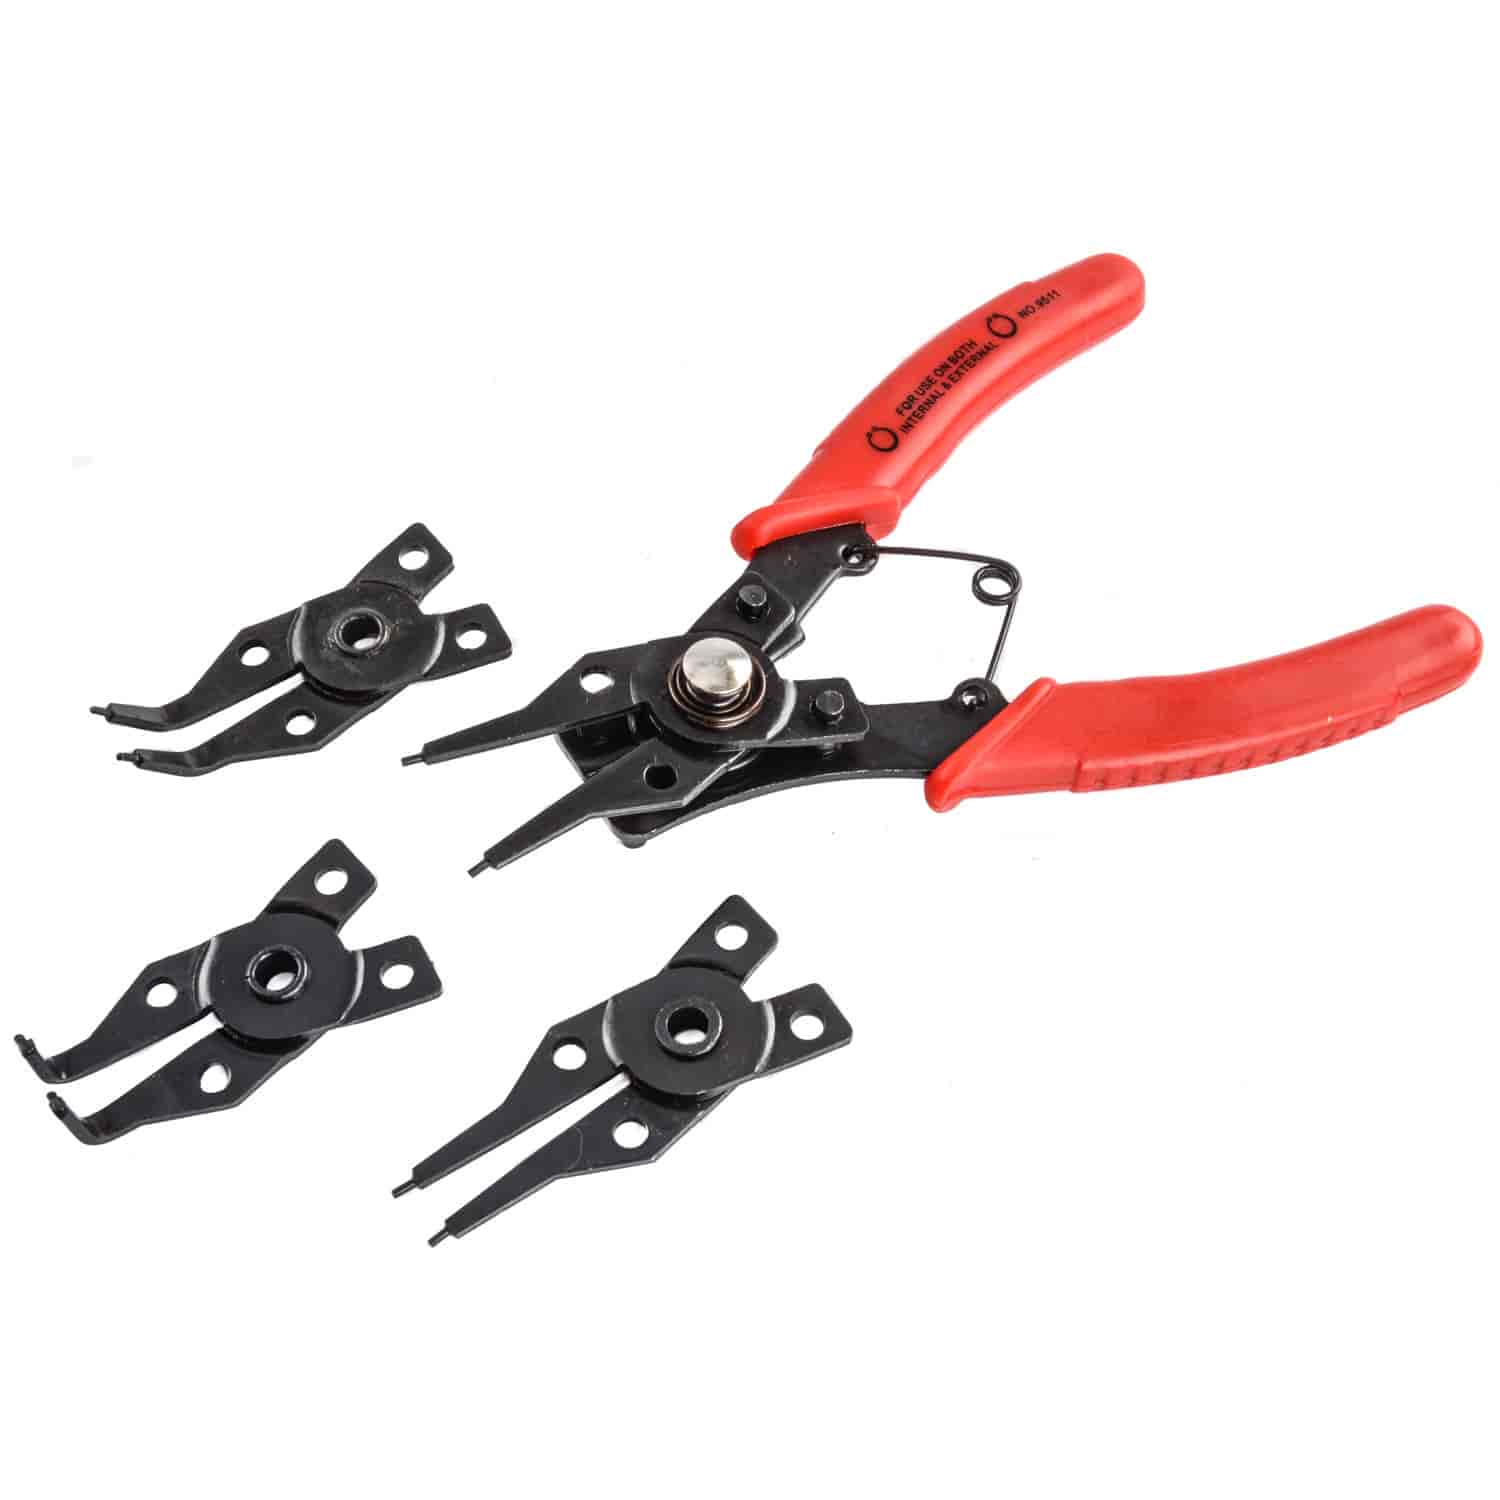 Snap-Ring Pliers [Removes 3/8 in. to 2 in. Snap-Rings]